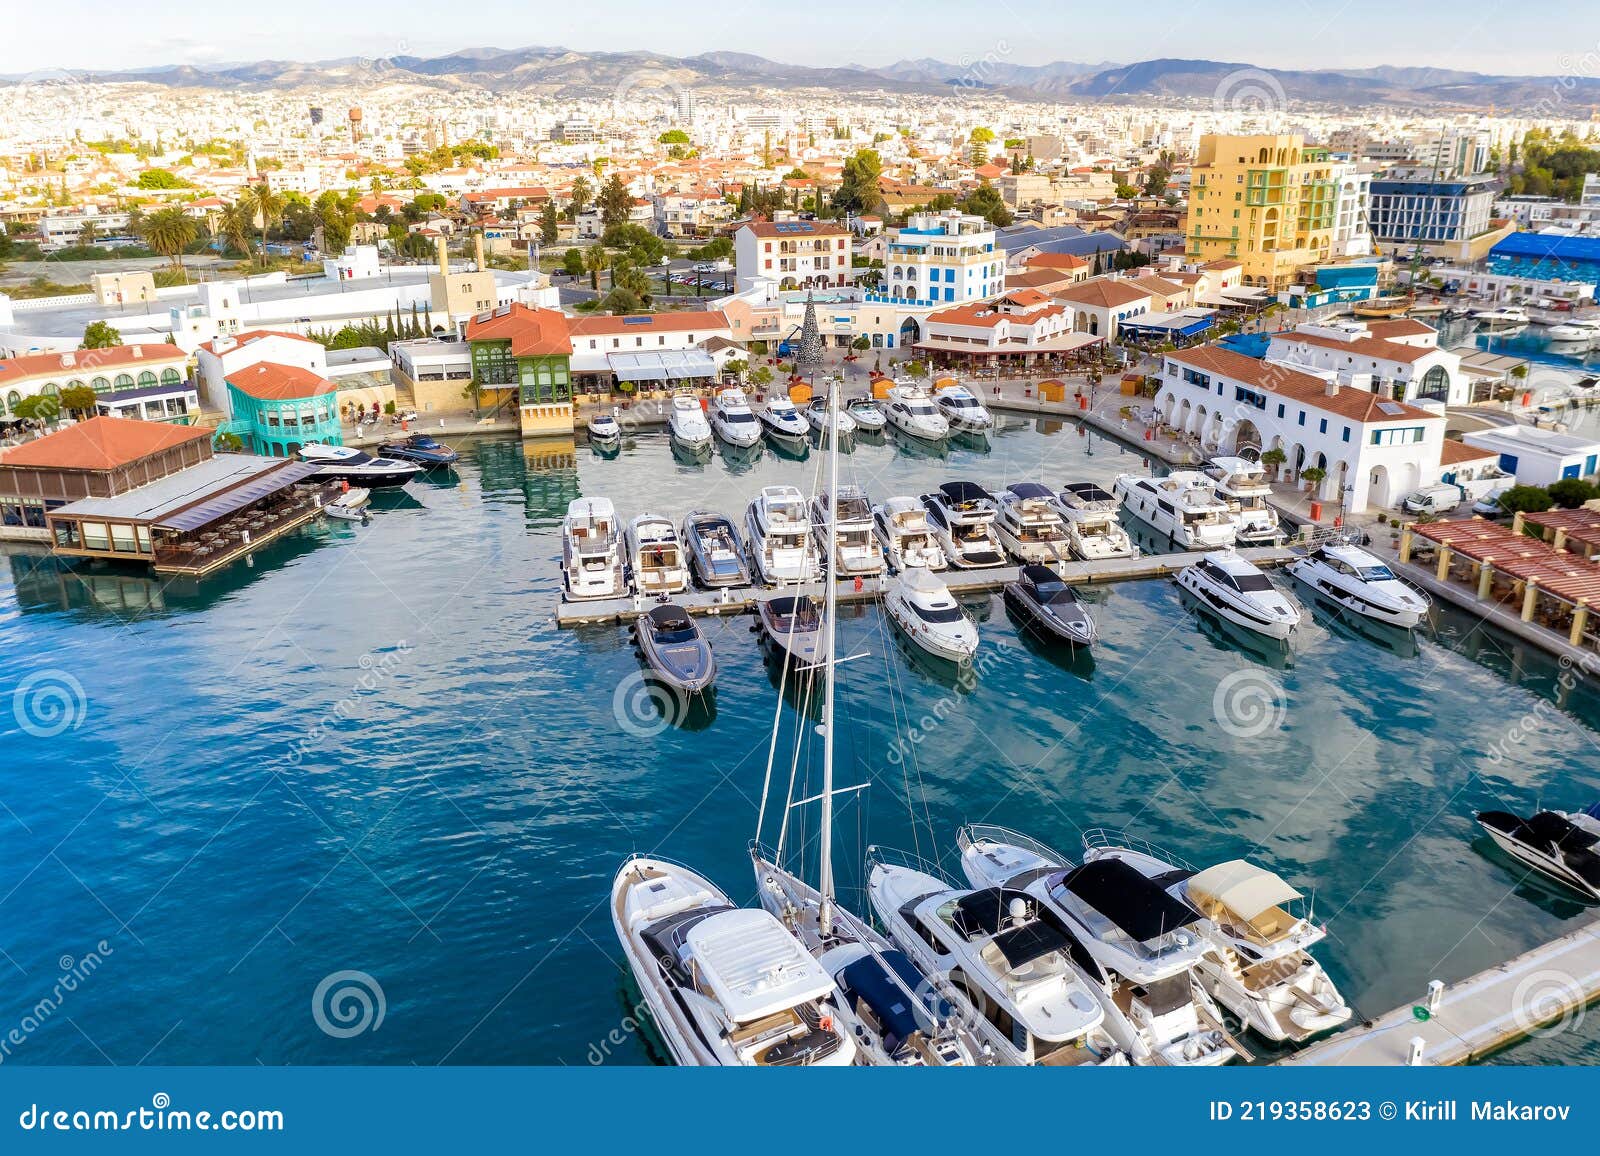 seafront cafes and restaurants in limassol marina, aerial view